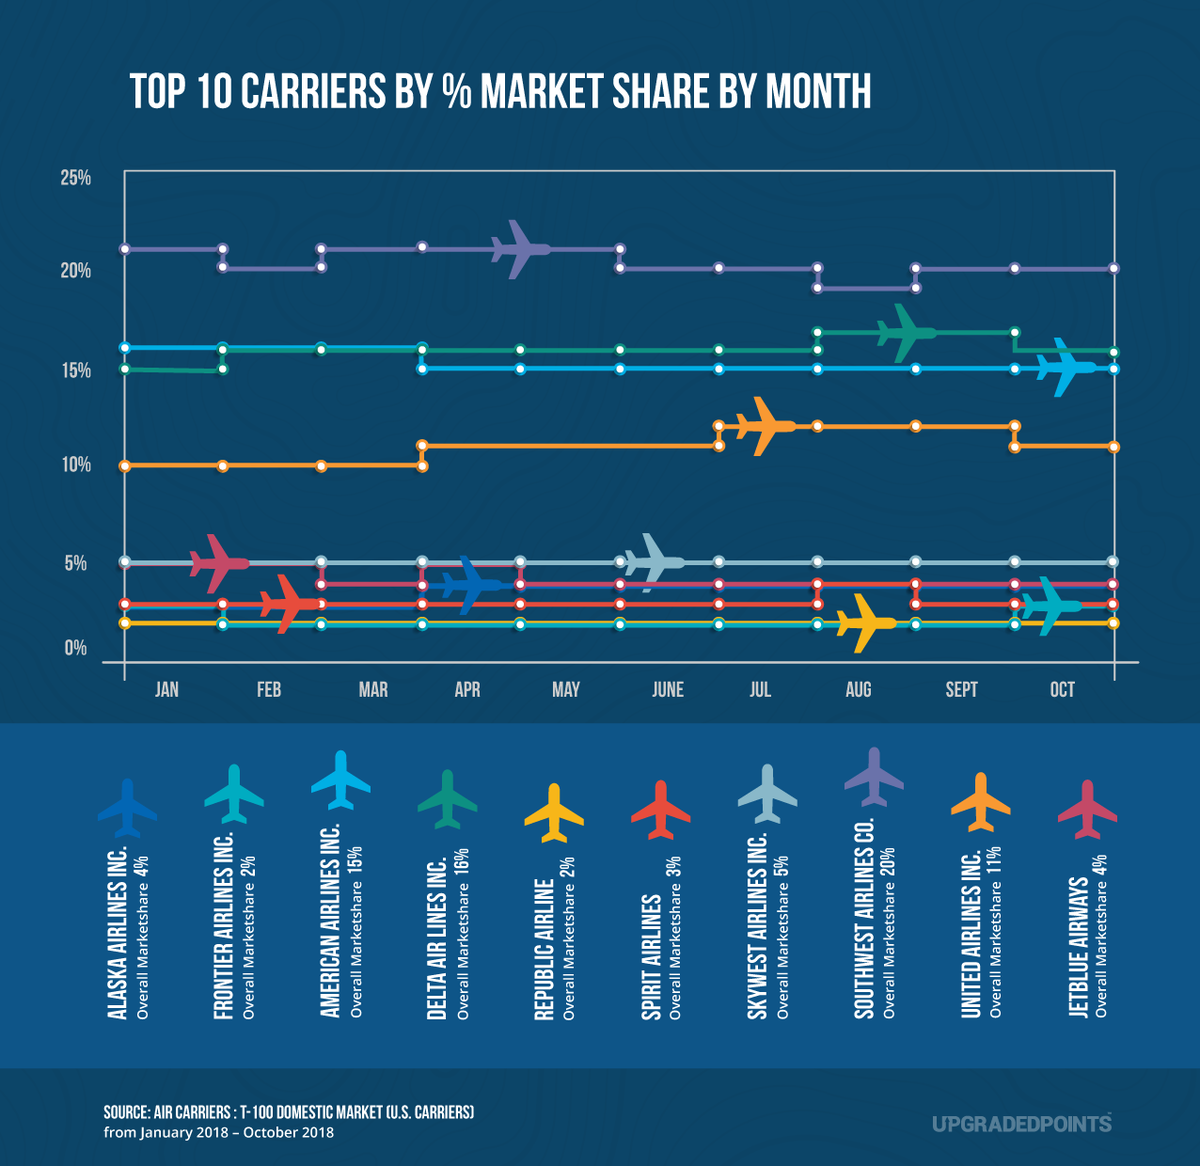 Top 10 Carriers by % market share by month